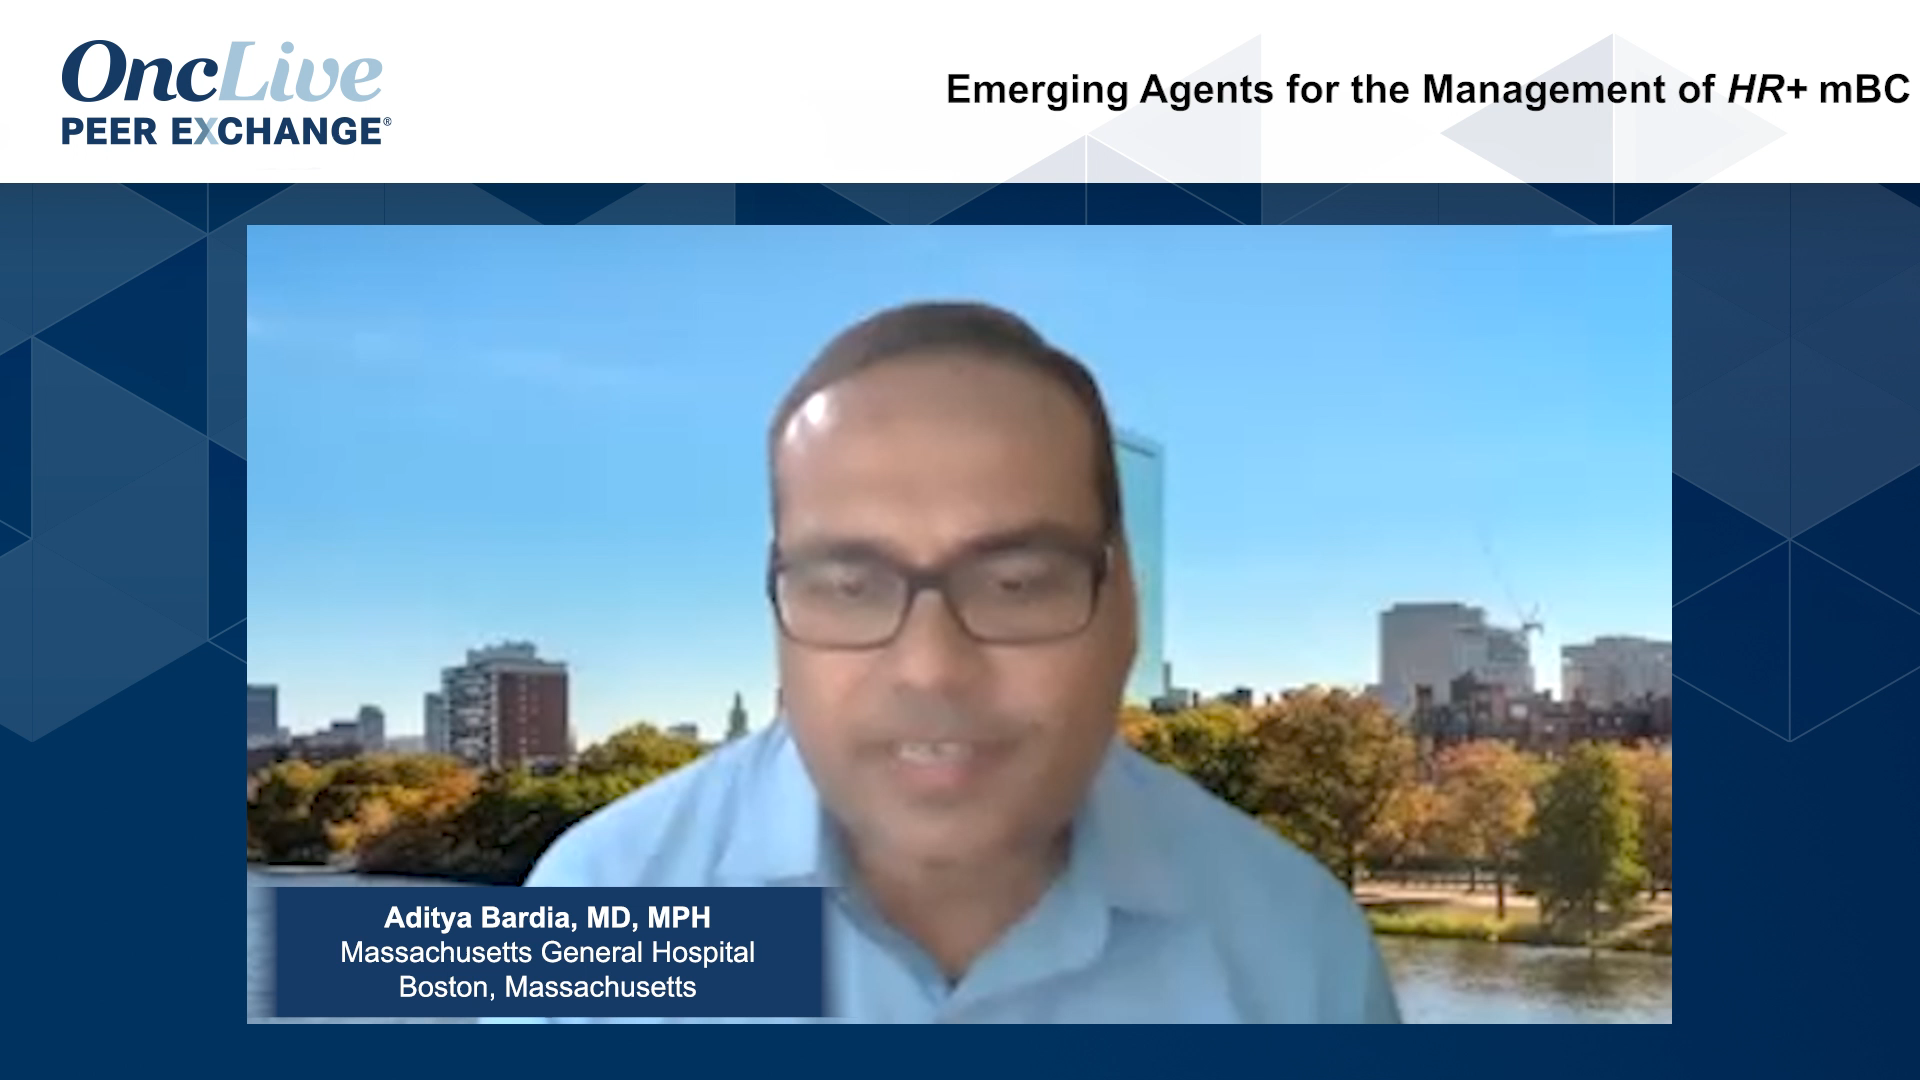 Emerging Agents for the Management of HR+ mBC